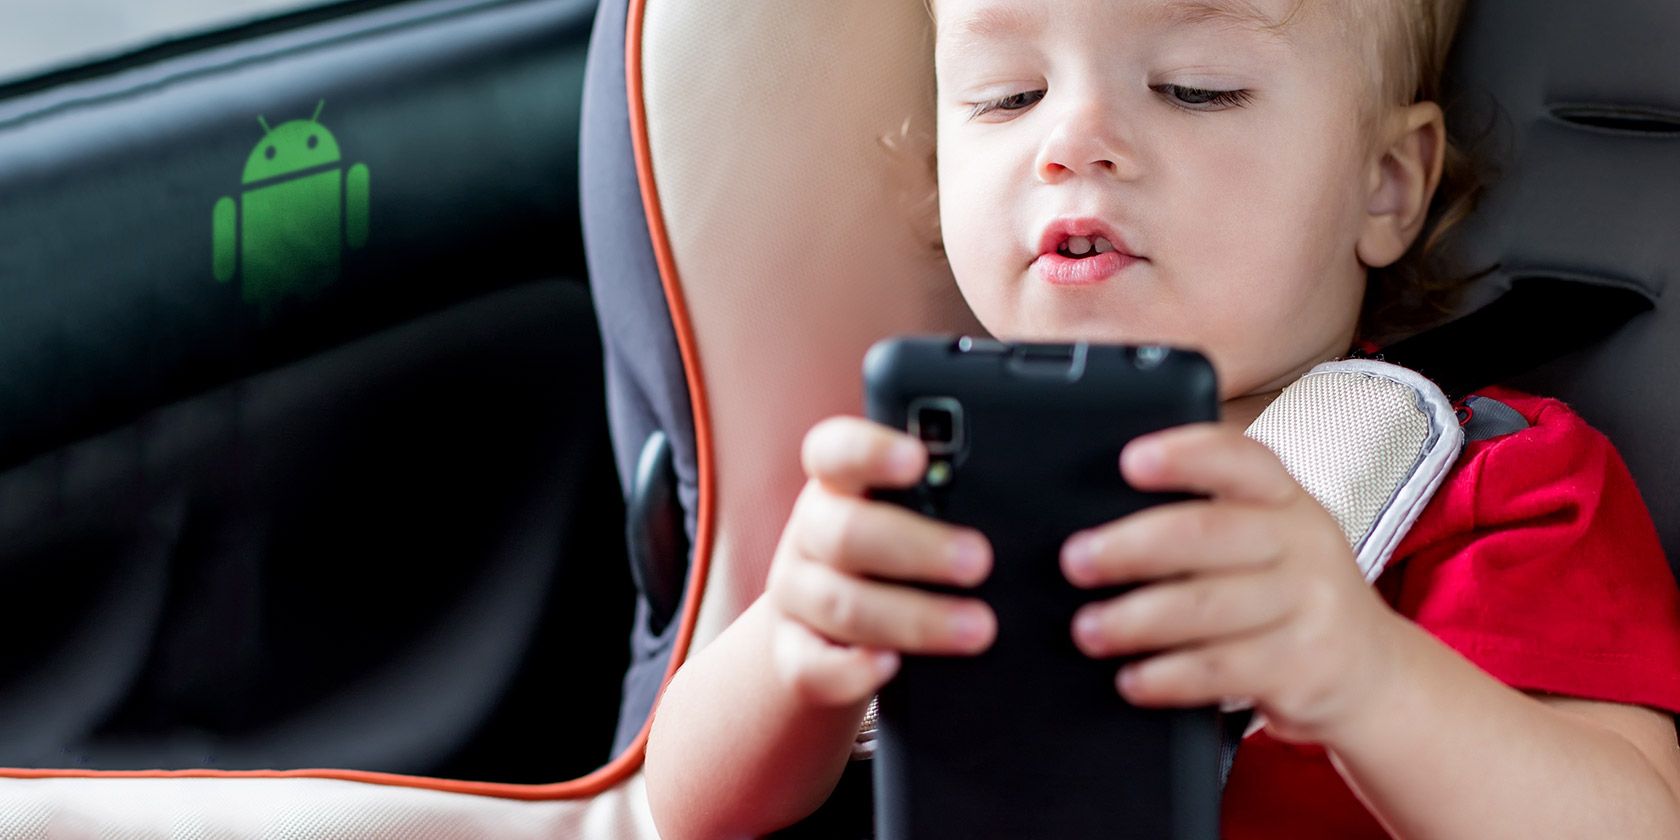 Young child using a smartphone in a car seat.